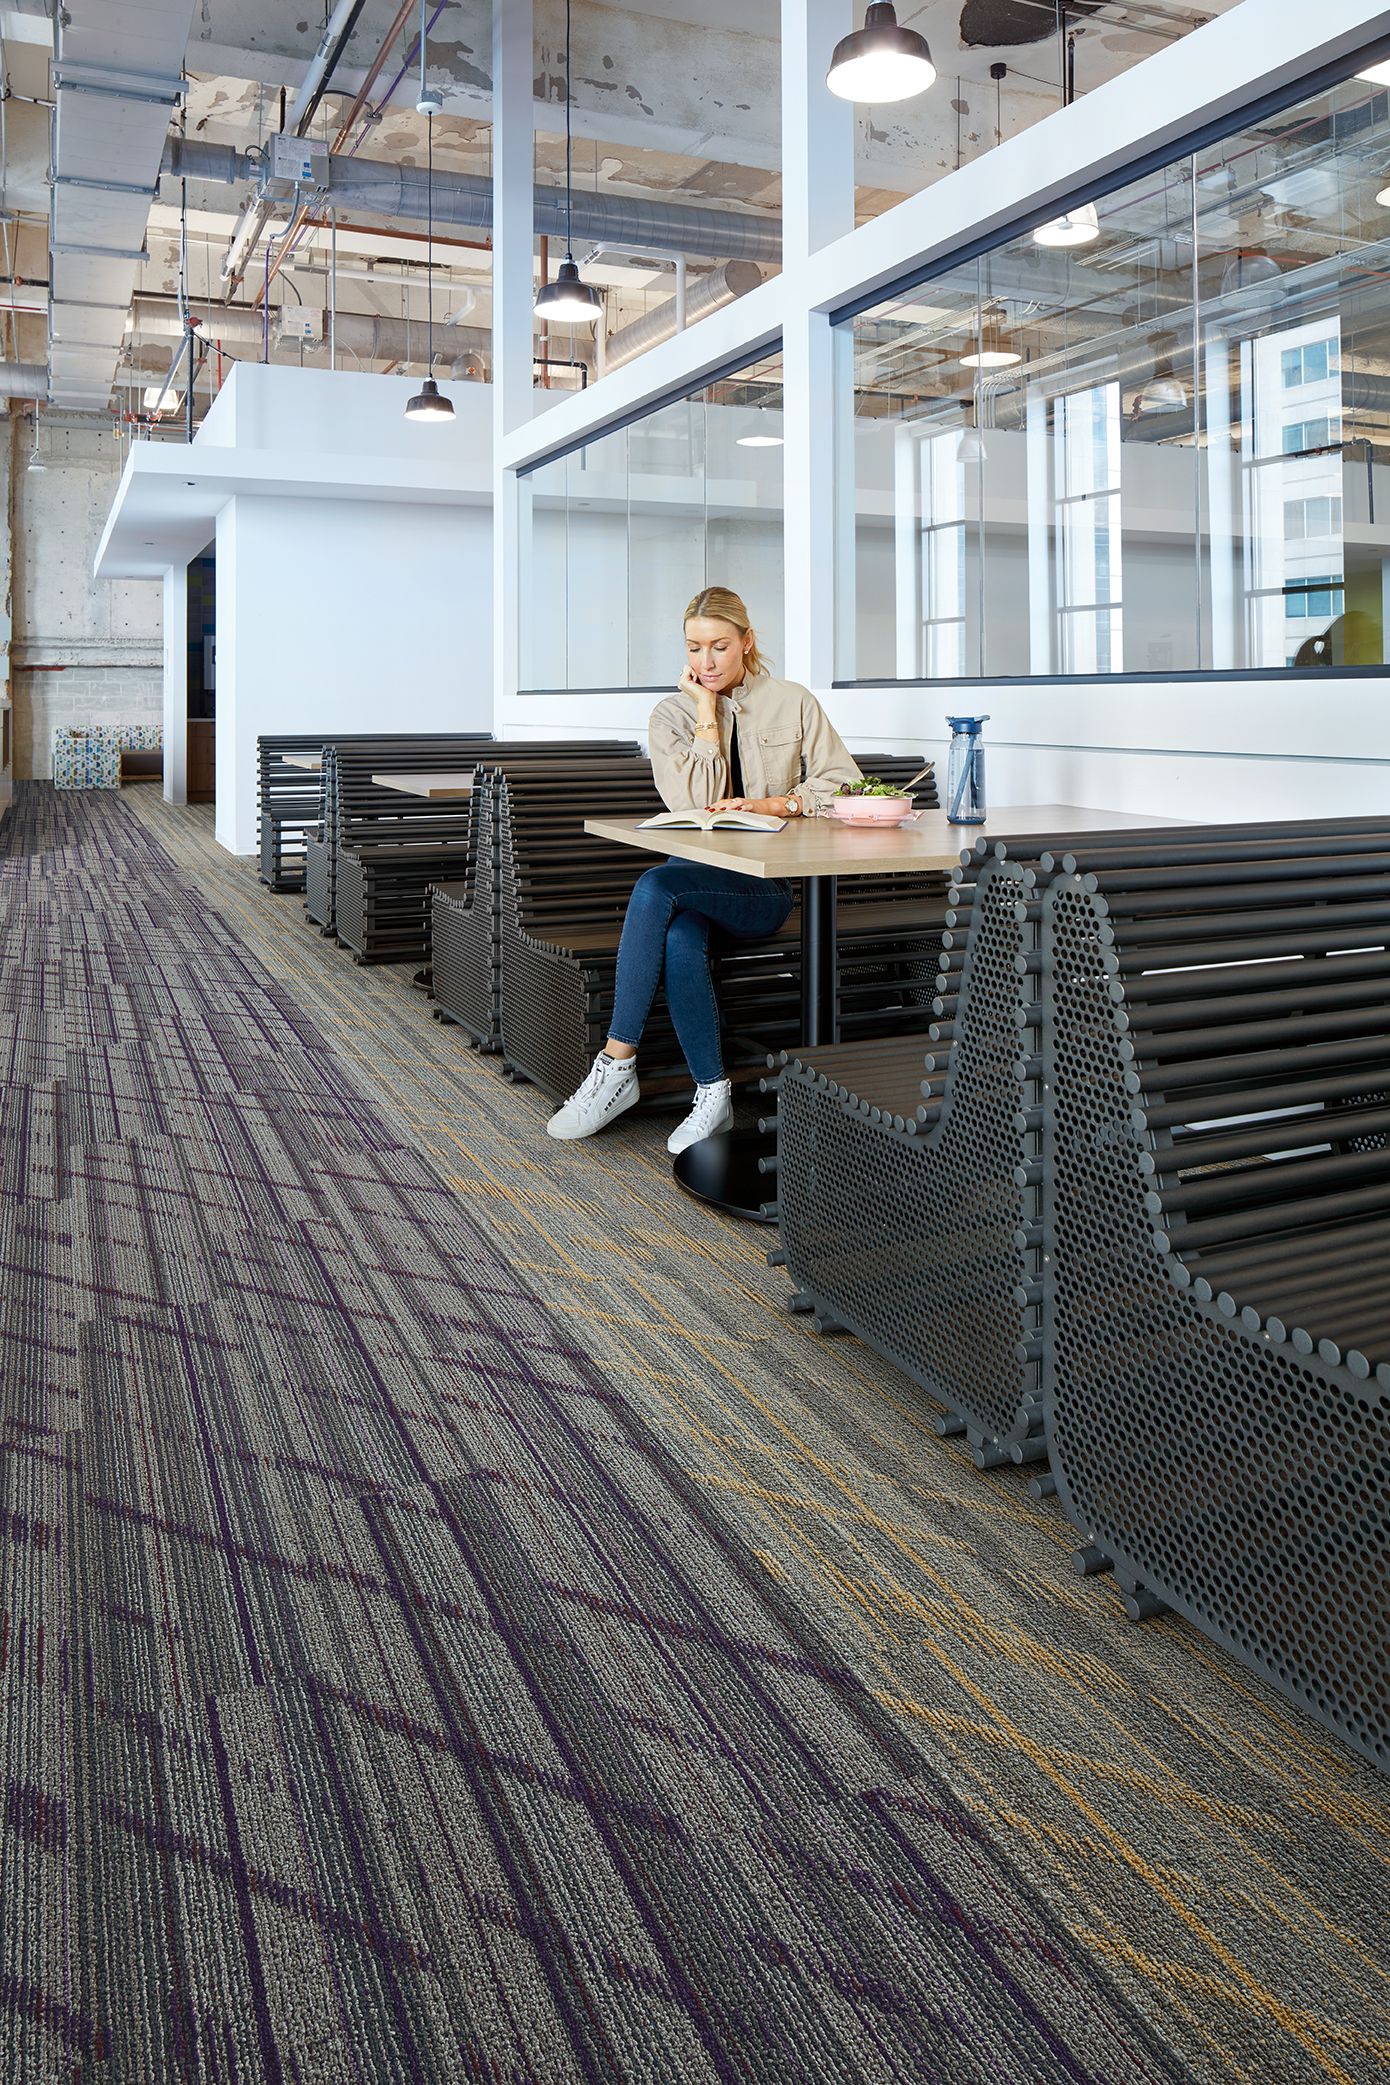 Interface Luminescent plank carpet tile in cafe area with woman seated at table imagen número 6